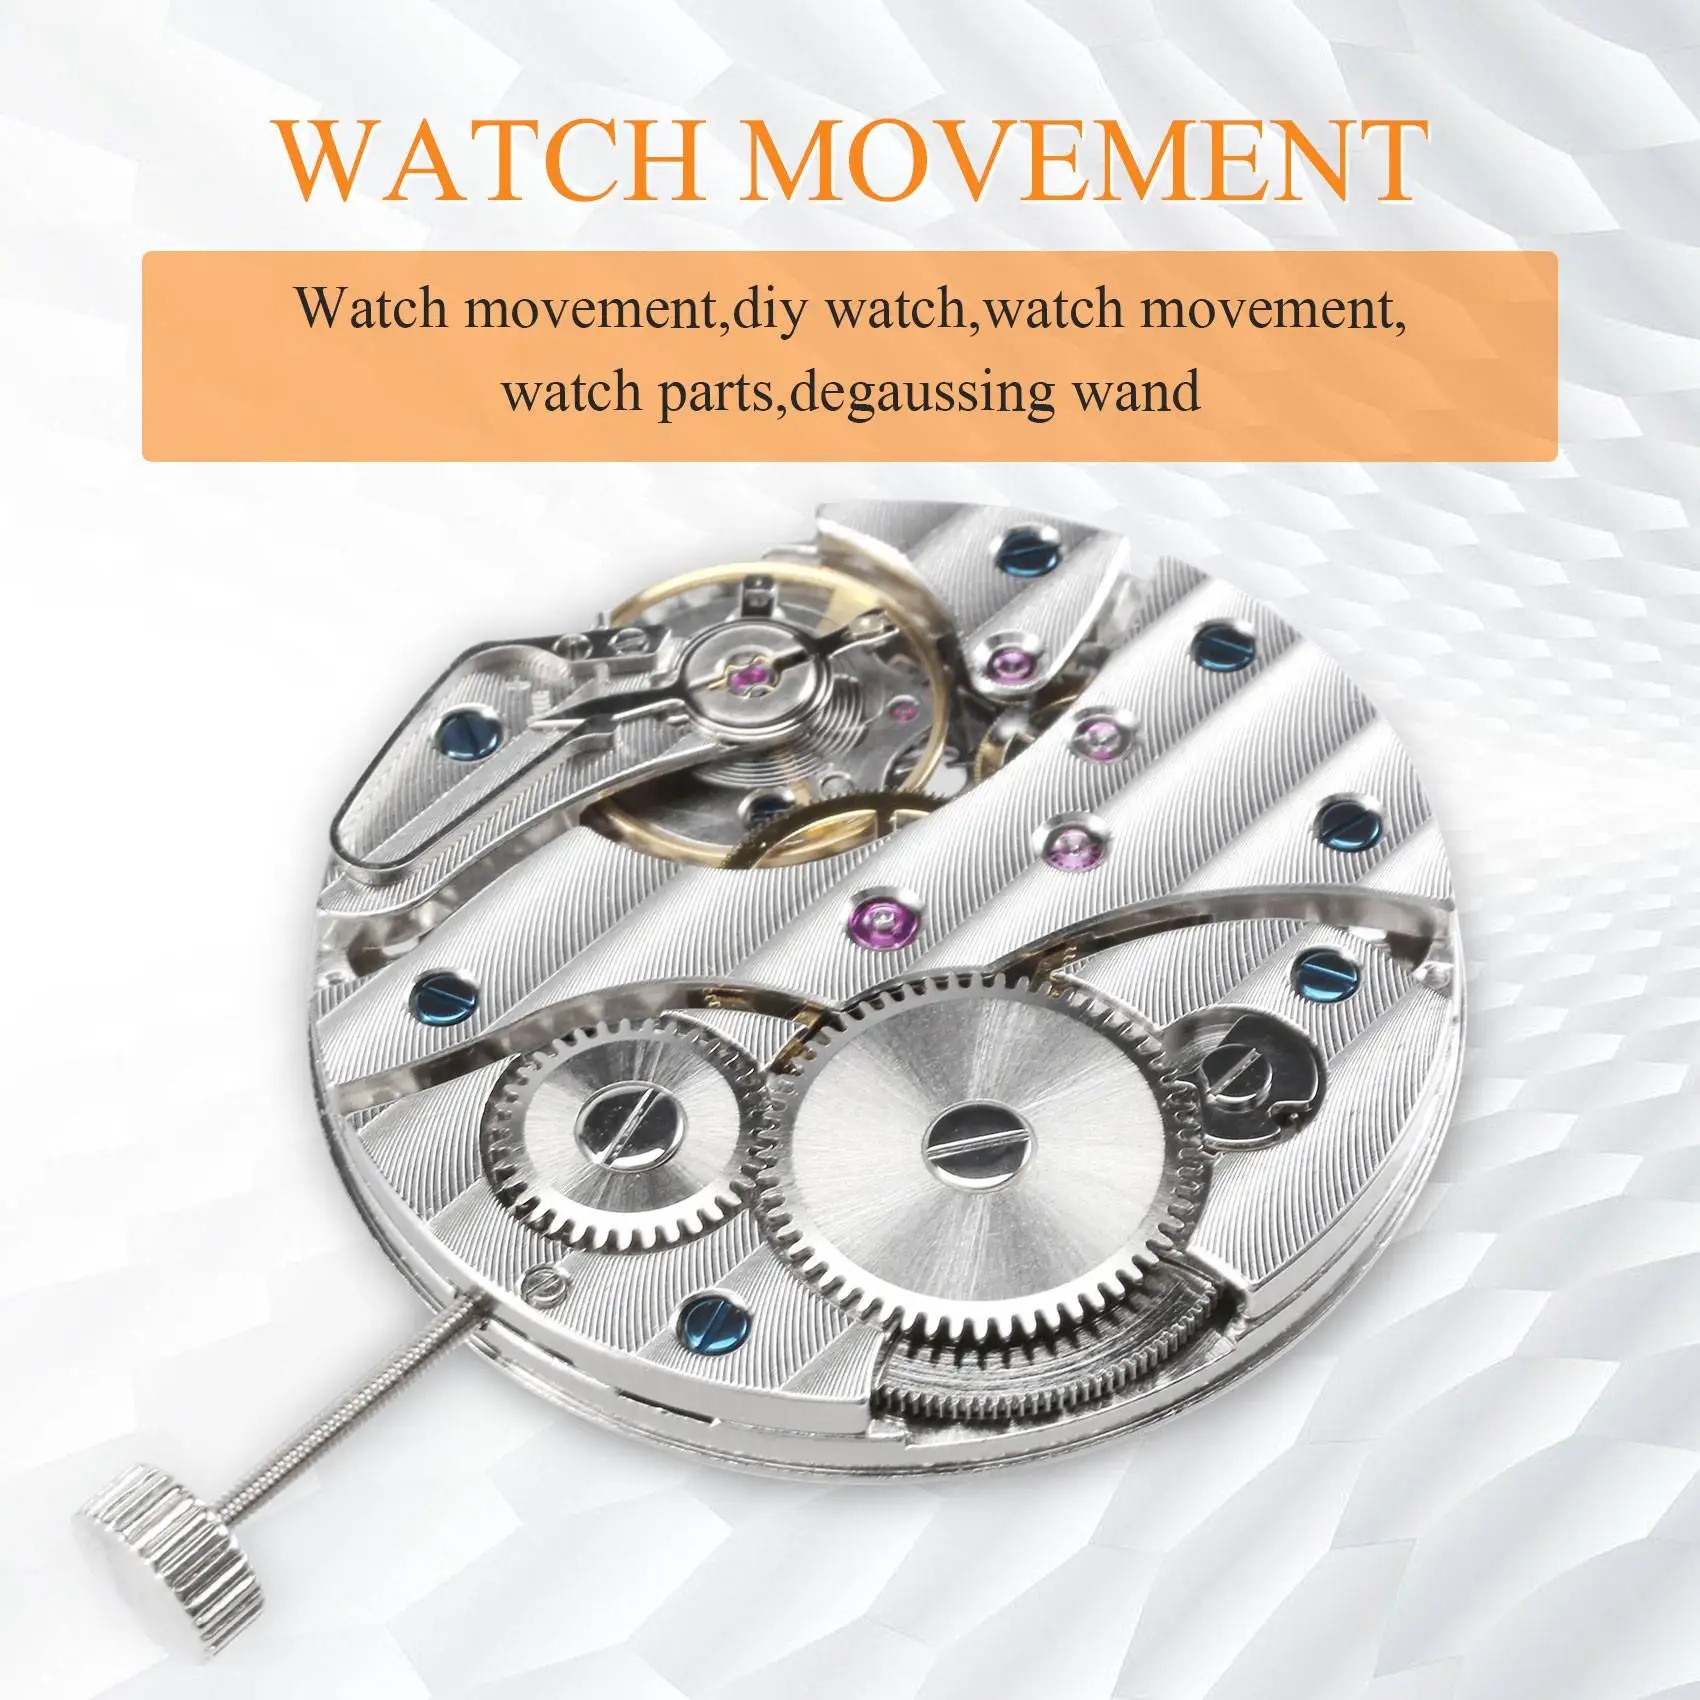 

Mechanical Hand Winding 6497 St36 Watch Movement P29 44mm Stainless Steel Watch Case Fit 6497 Movement Watch